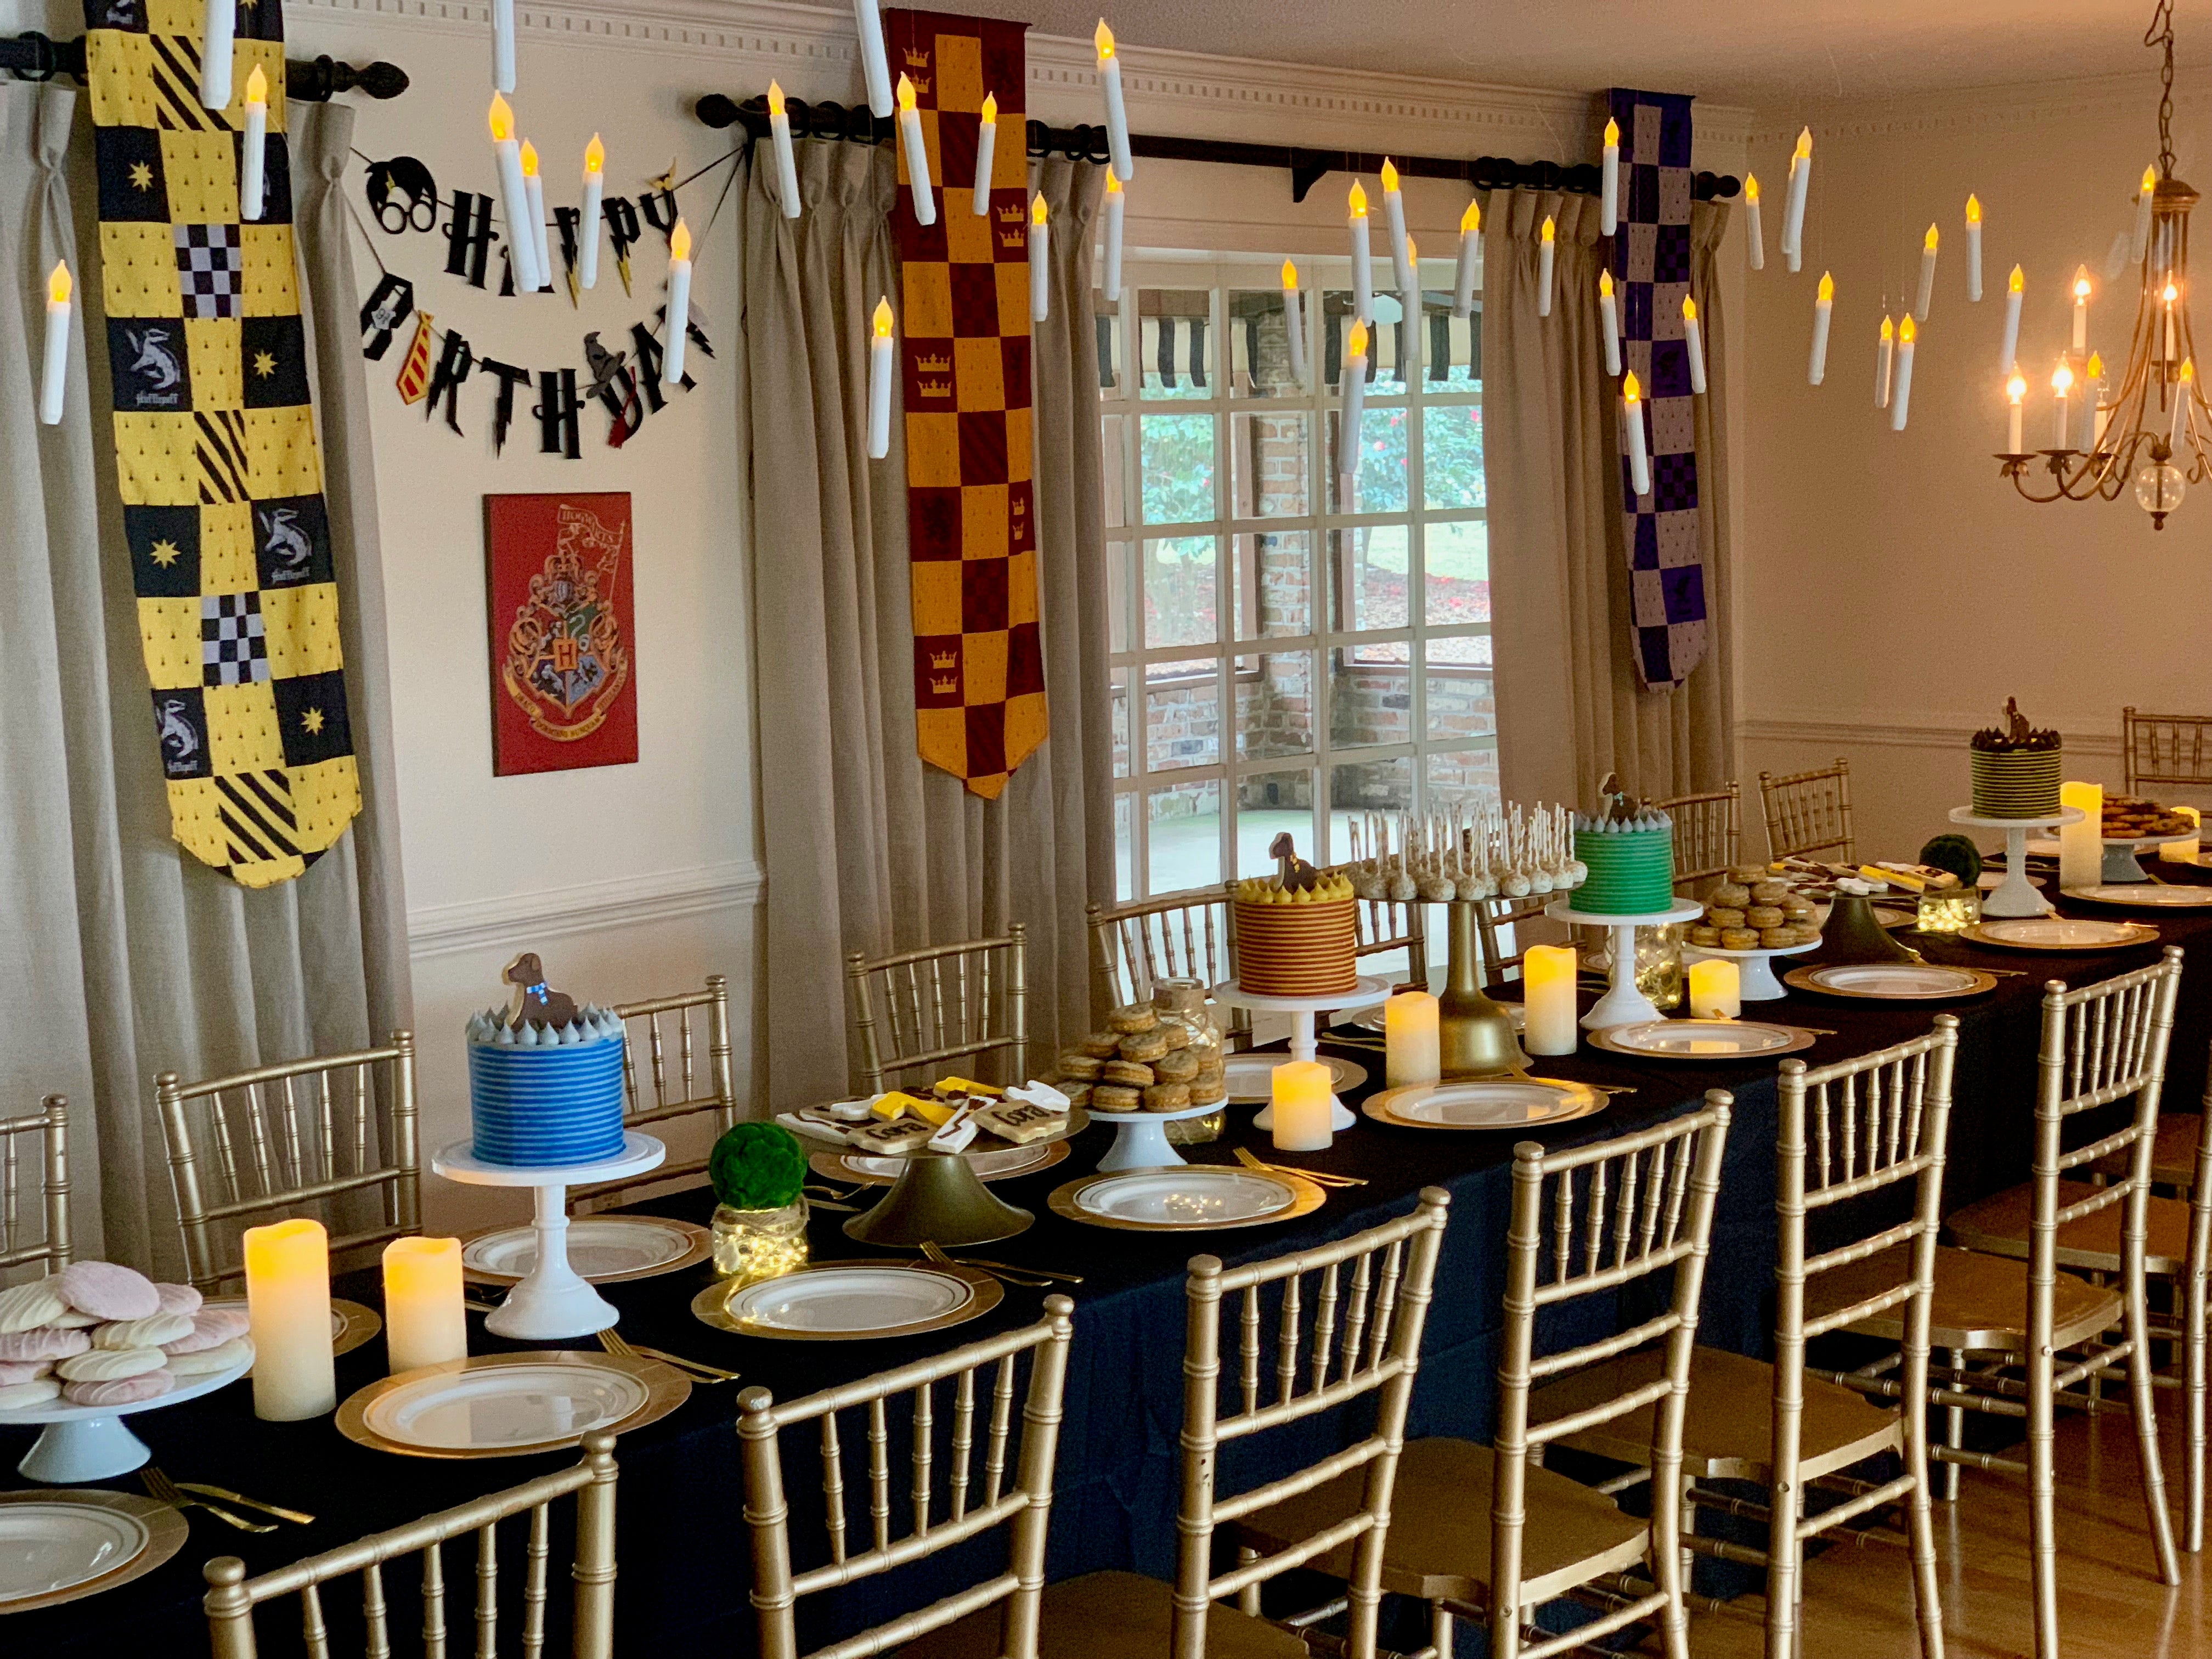 Harry Potter Birthday Party Table with Floating Candles